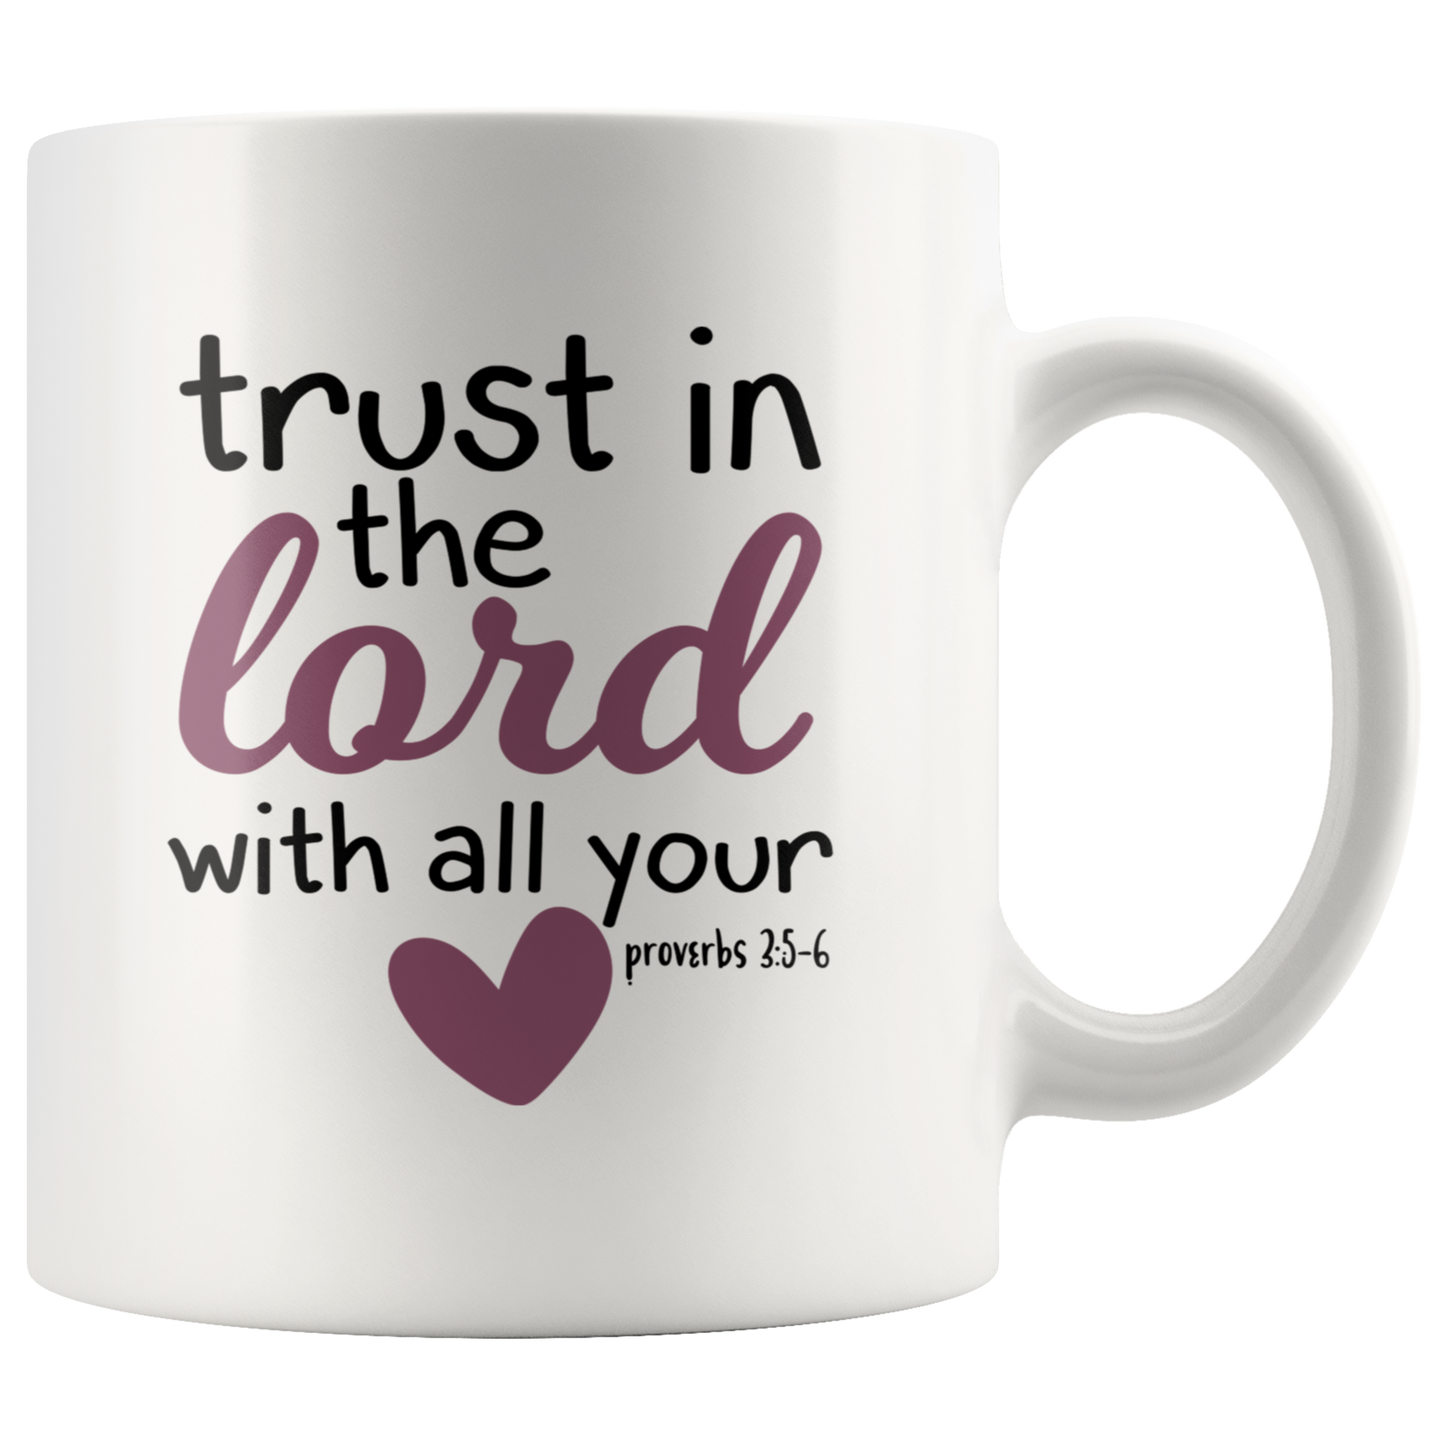 Christian coffee mug gift Trust in the Lord Religious mug Inspirational Faith quote cup